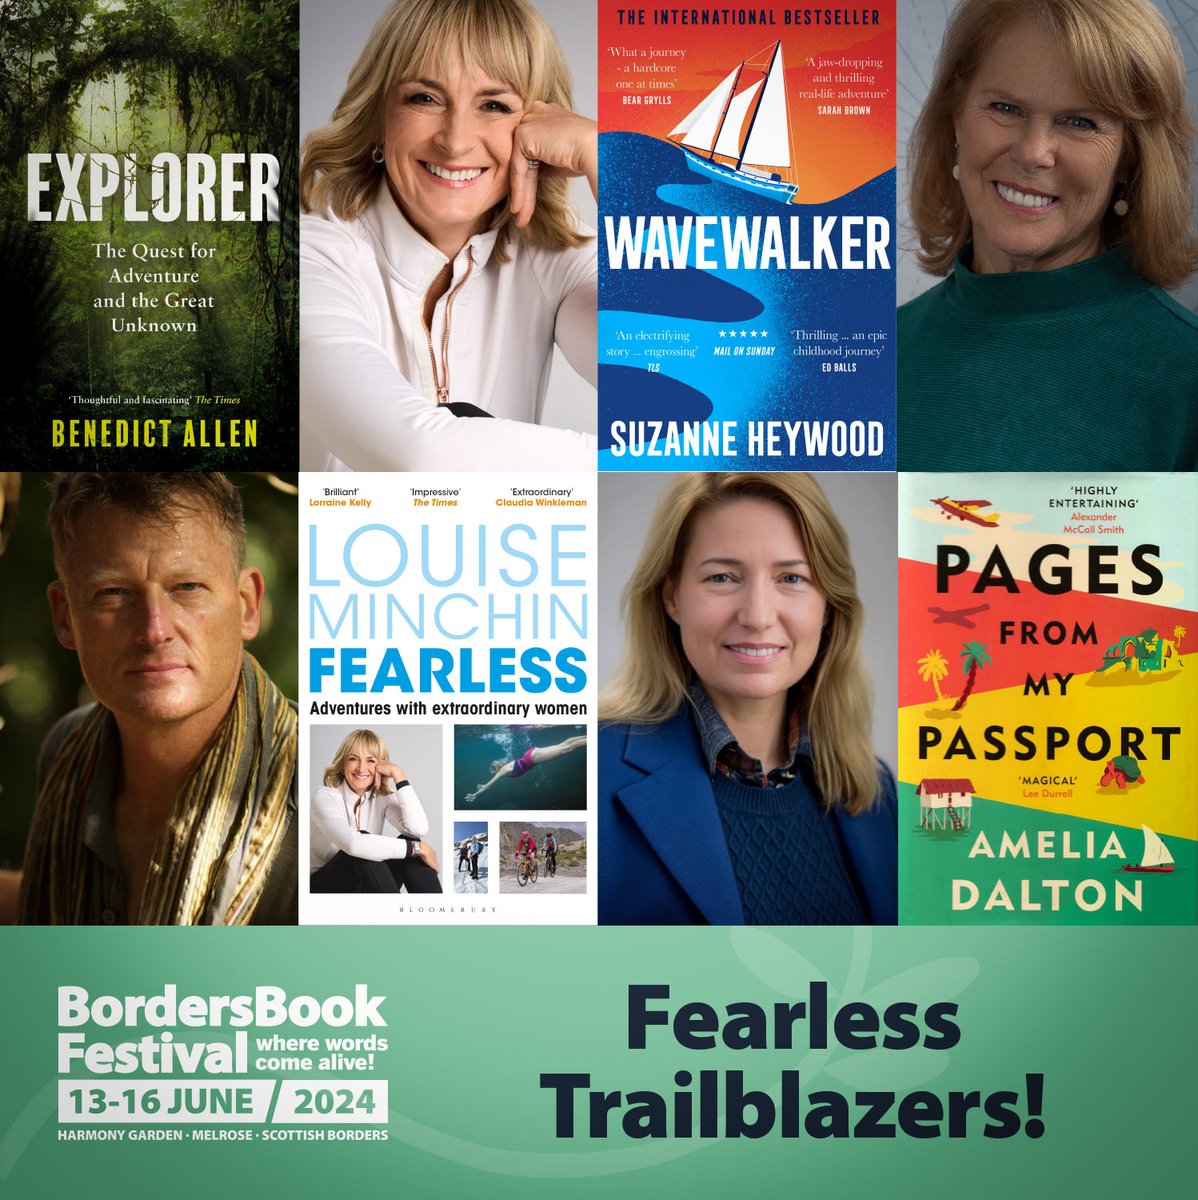 In Benedict Allen's global quest for discovery, he's been beaten up, robbed, shot at and left for dead. Don’t miss this, and many other extraordinary stories of survival from our trailblazing authors Louise Minchin, Suzanne Haywood and Amelia Dalton. bordersbookfestival.org